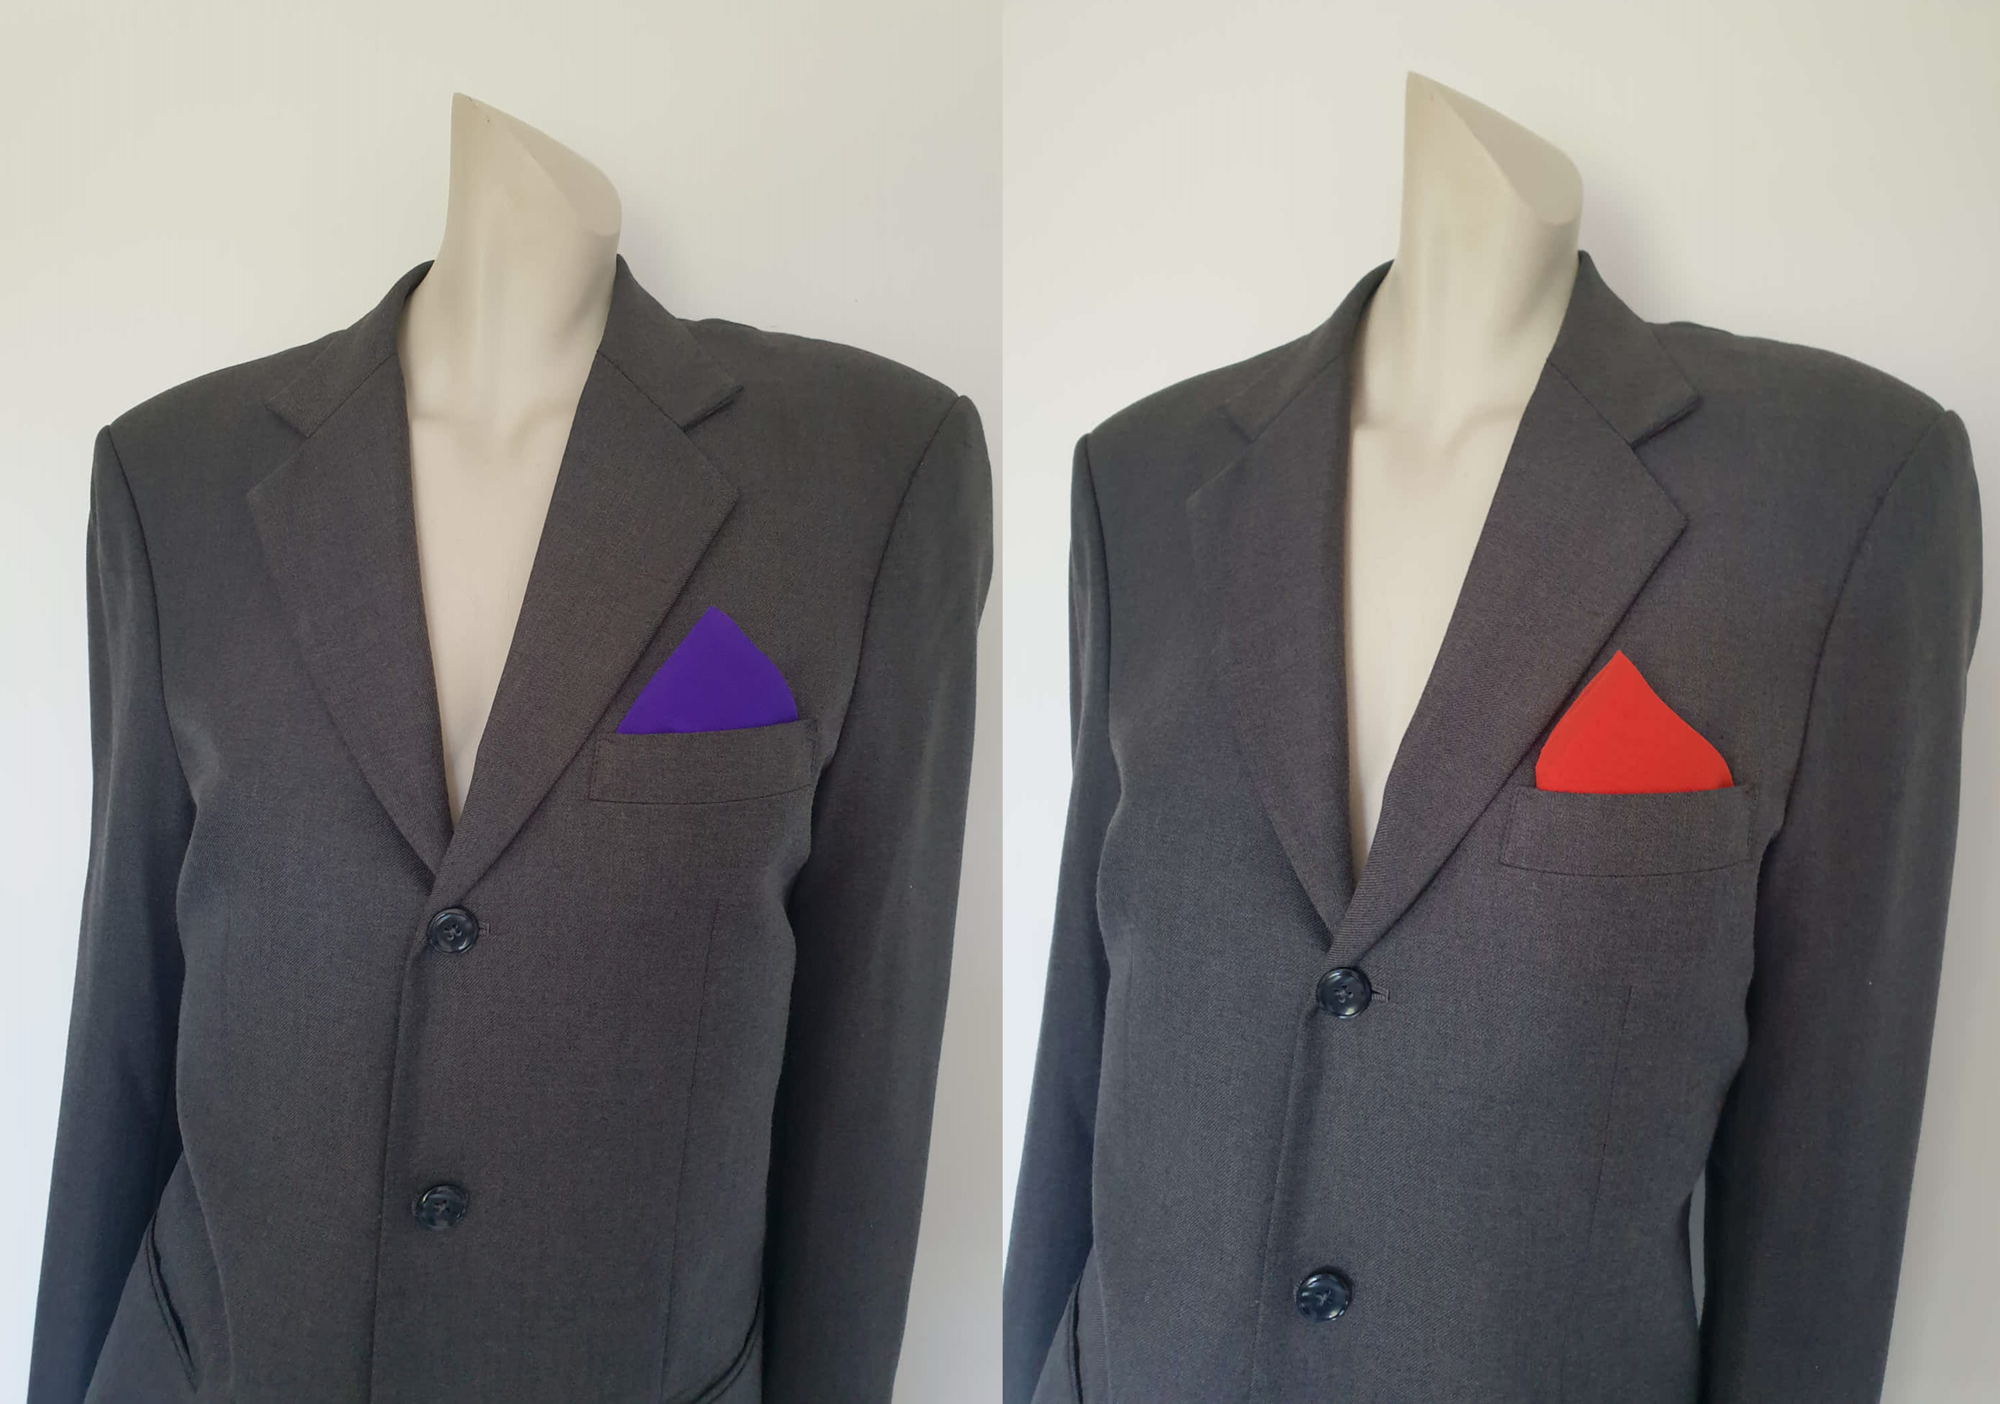 Unisex Pocket Squares in Five Colours - Red, Blue, White, Yellow, Brown